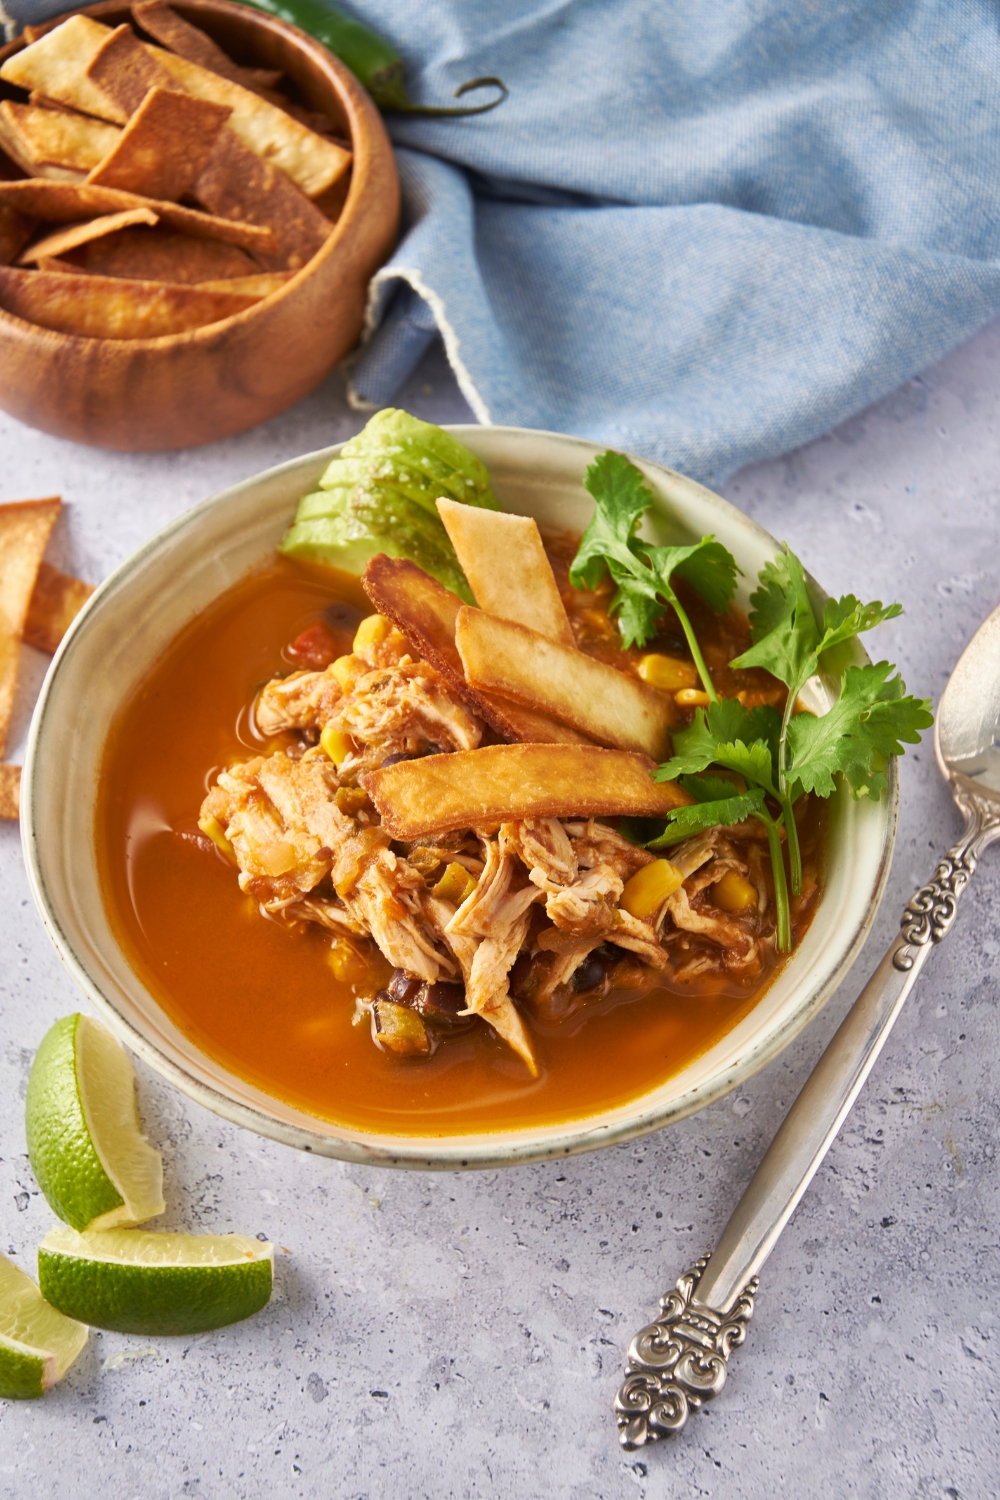 Chicken tortilla soup in an off-white bowl garnished with fresh cilantro, fried tortilla chips, and sliced avocado.